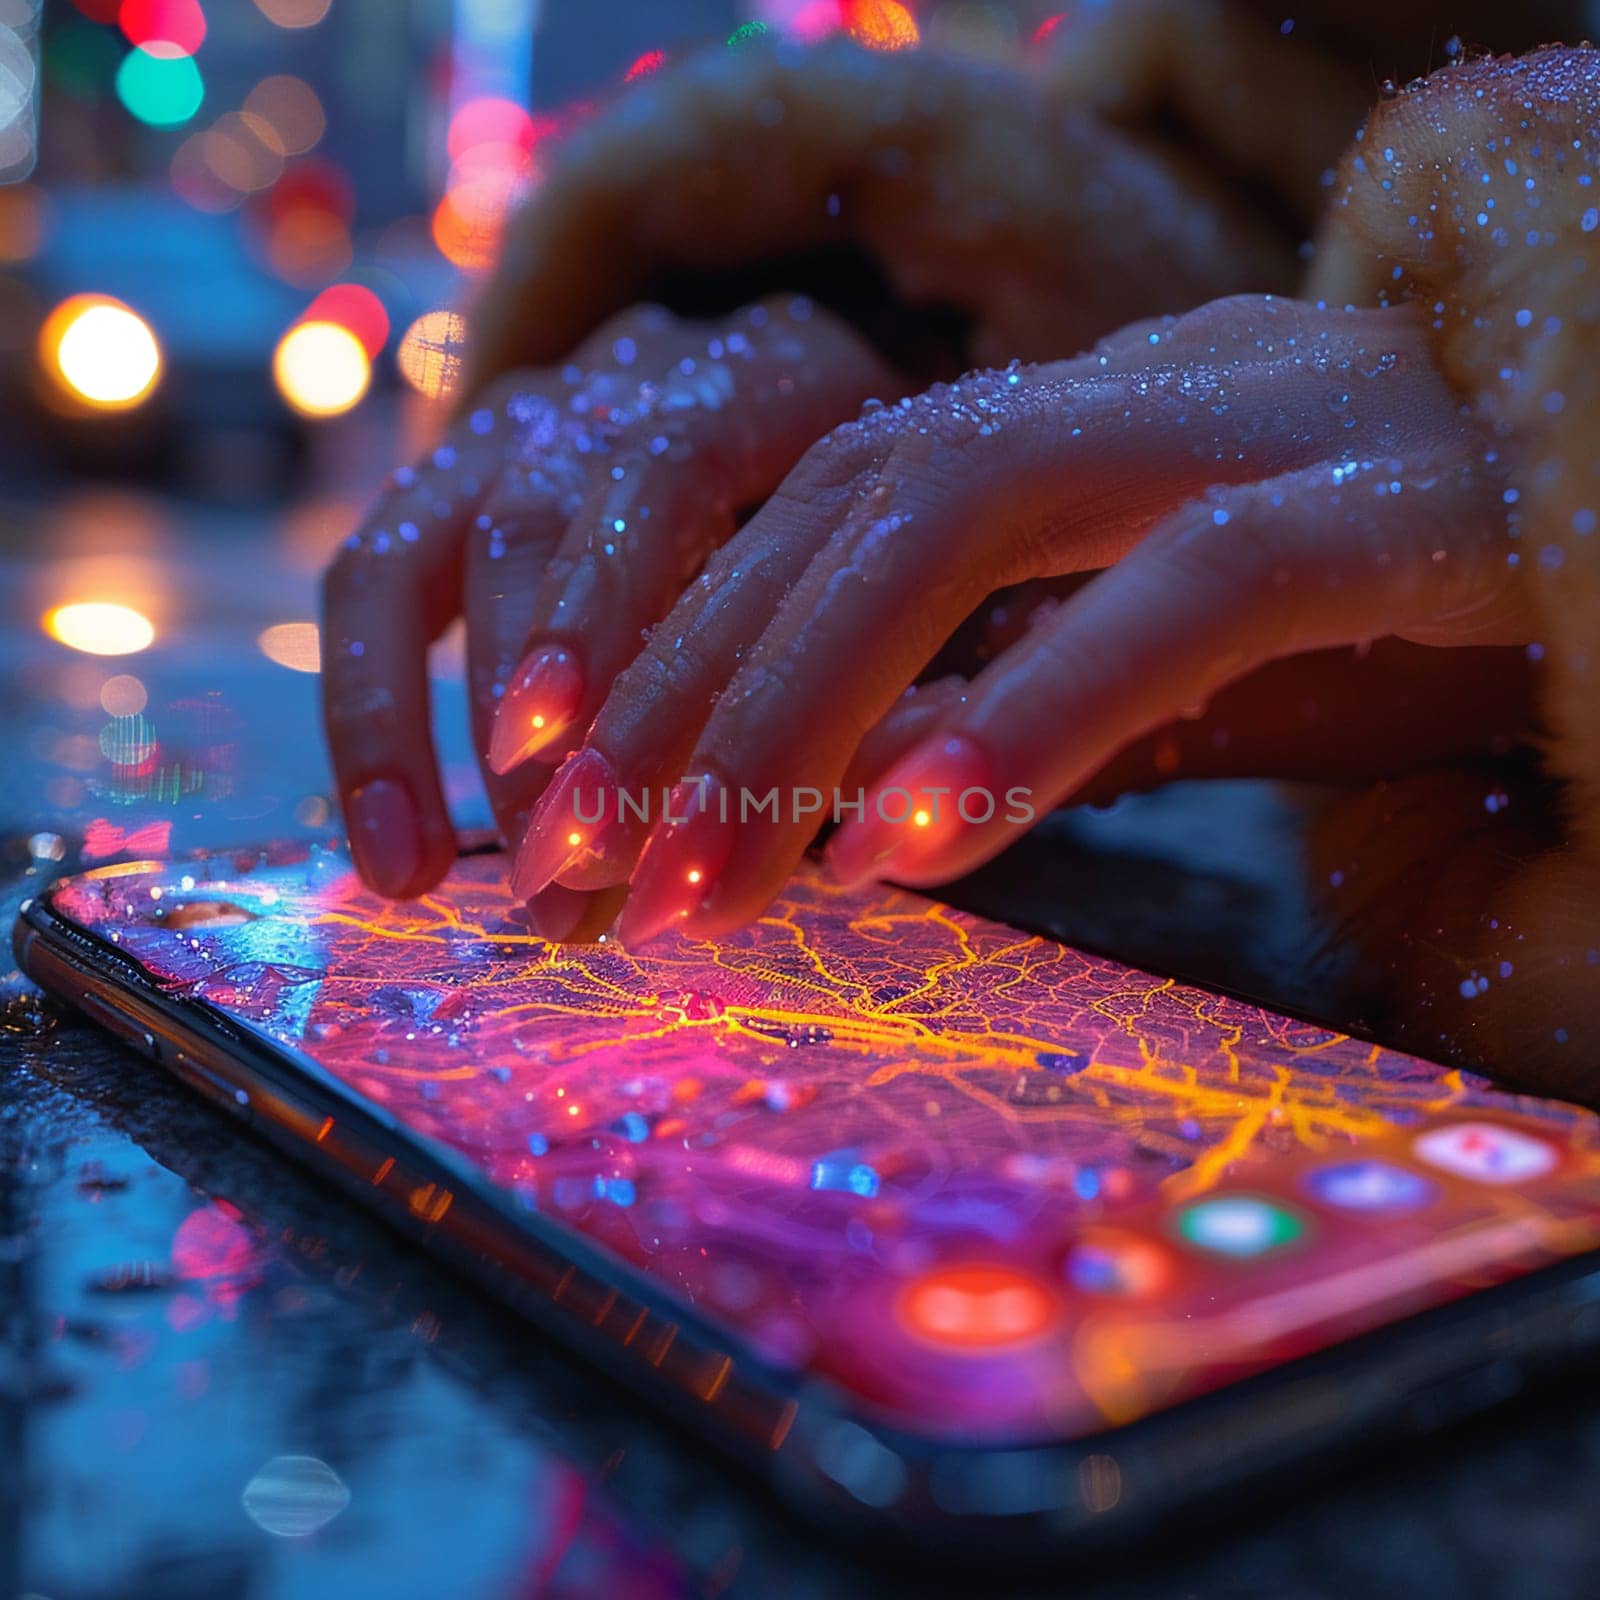 Close-up of fingers scrolling through a news feed on a phone, representing information consumption.